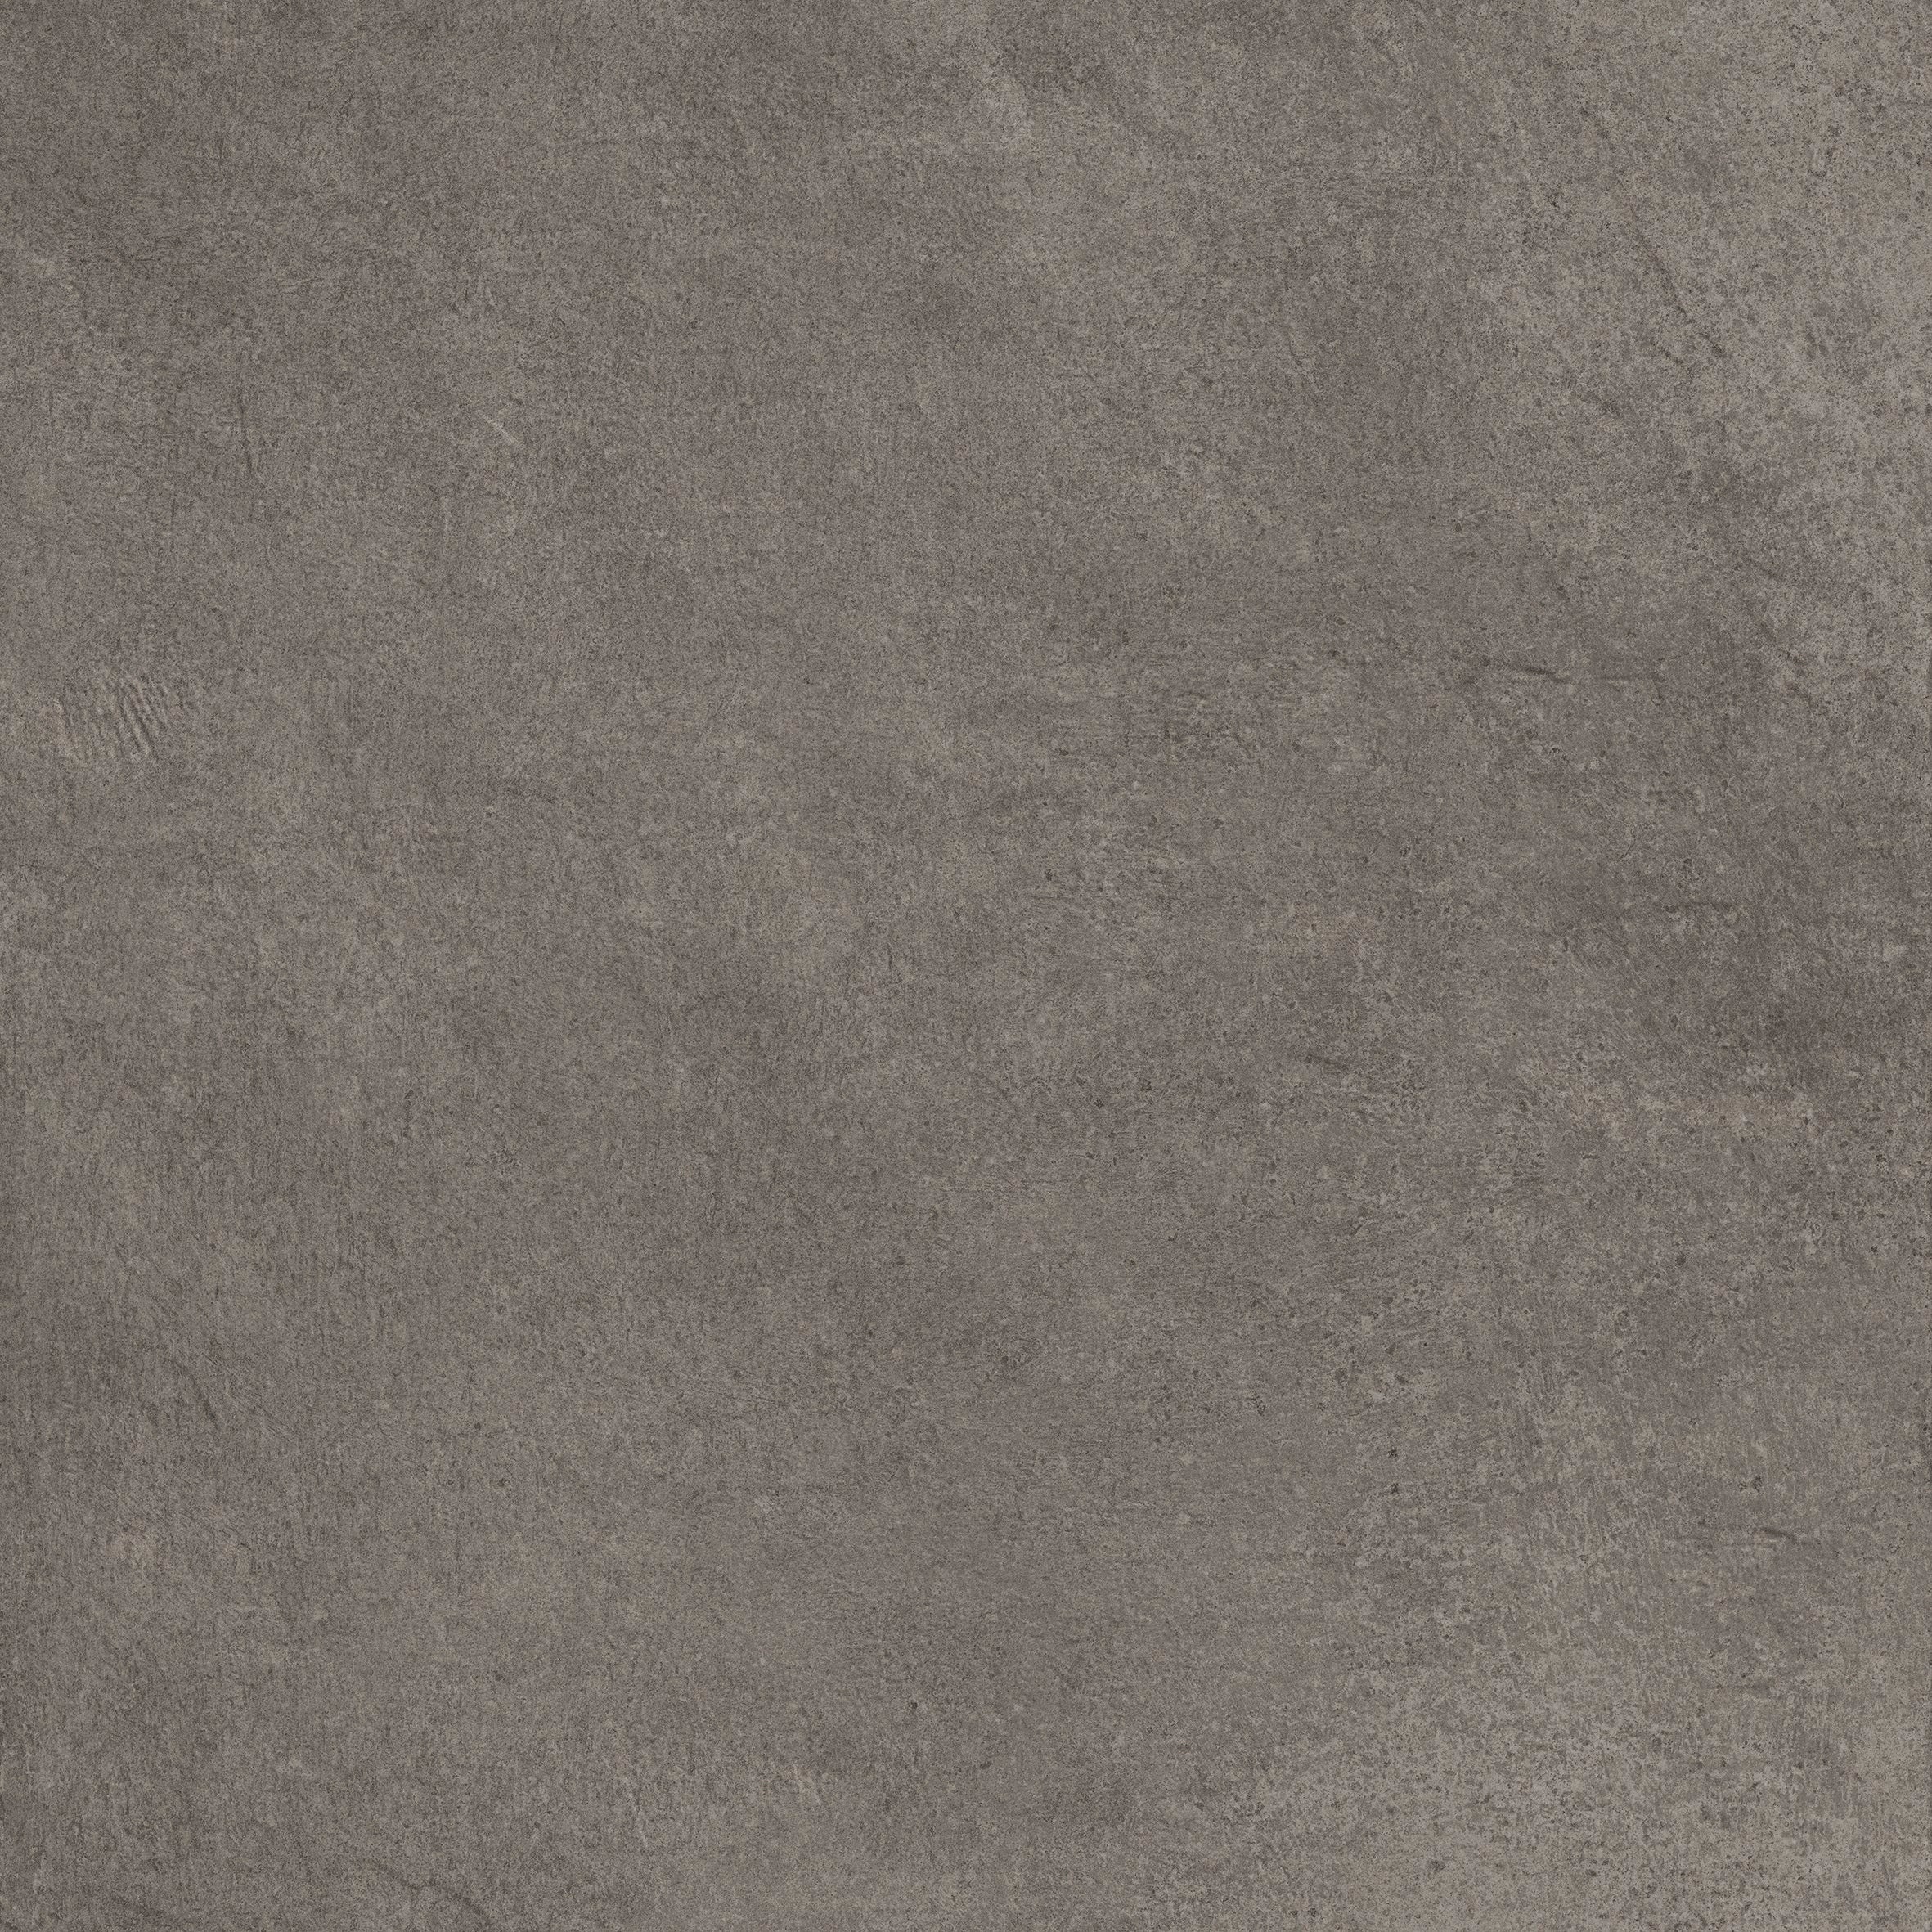 landmark 9mm madein vision grey field tile 24x24x9mm matte rectified porcelain tile distributed by surface group international